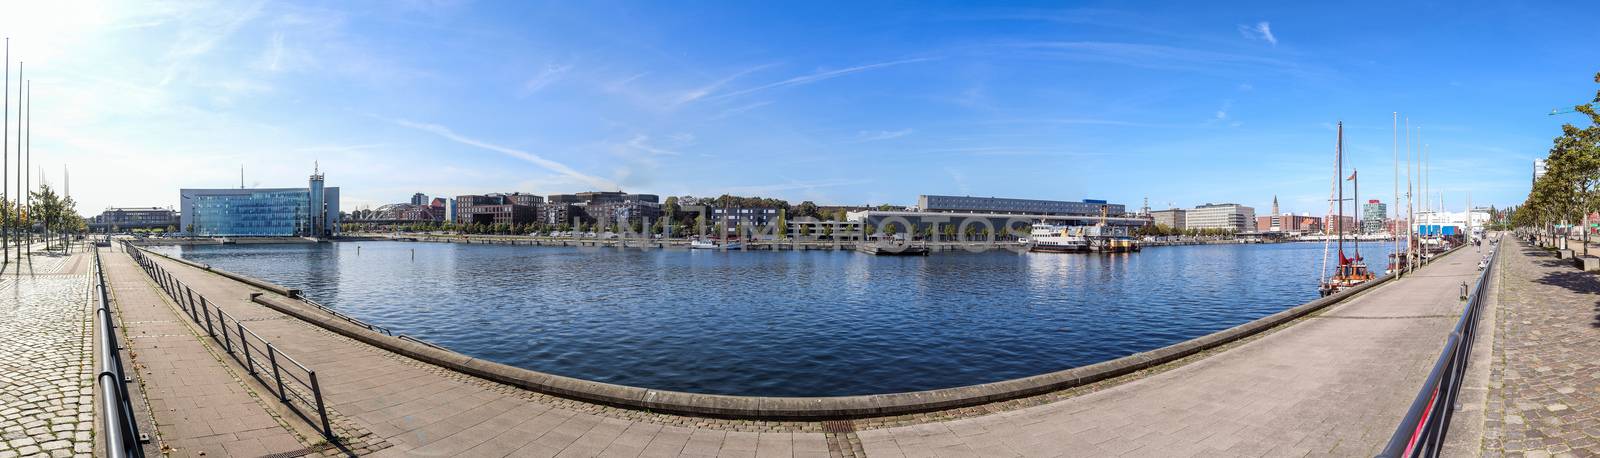 High resolution panorama of the port of Kiel in Germany on a sunny day